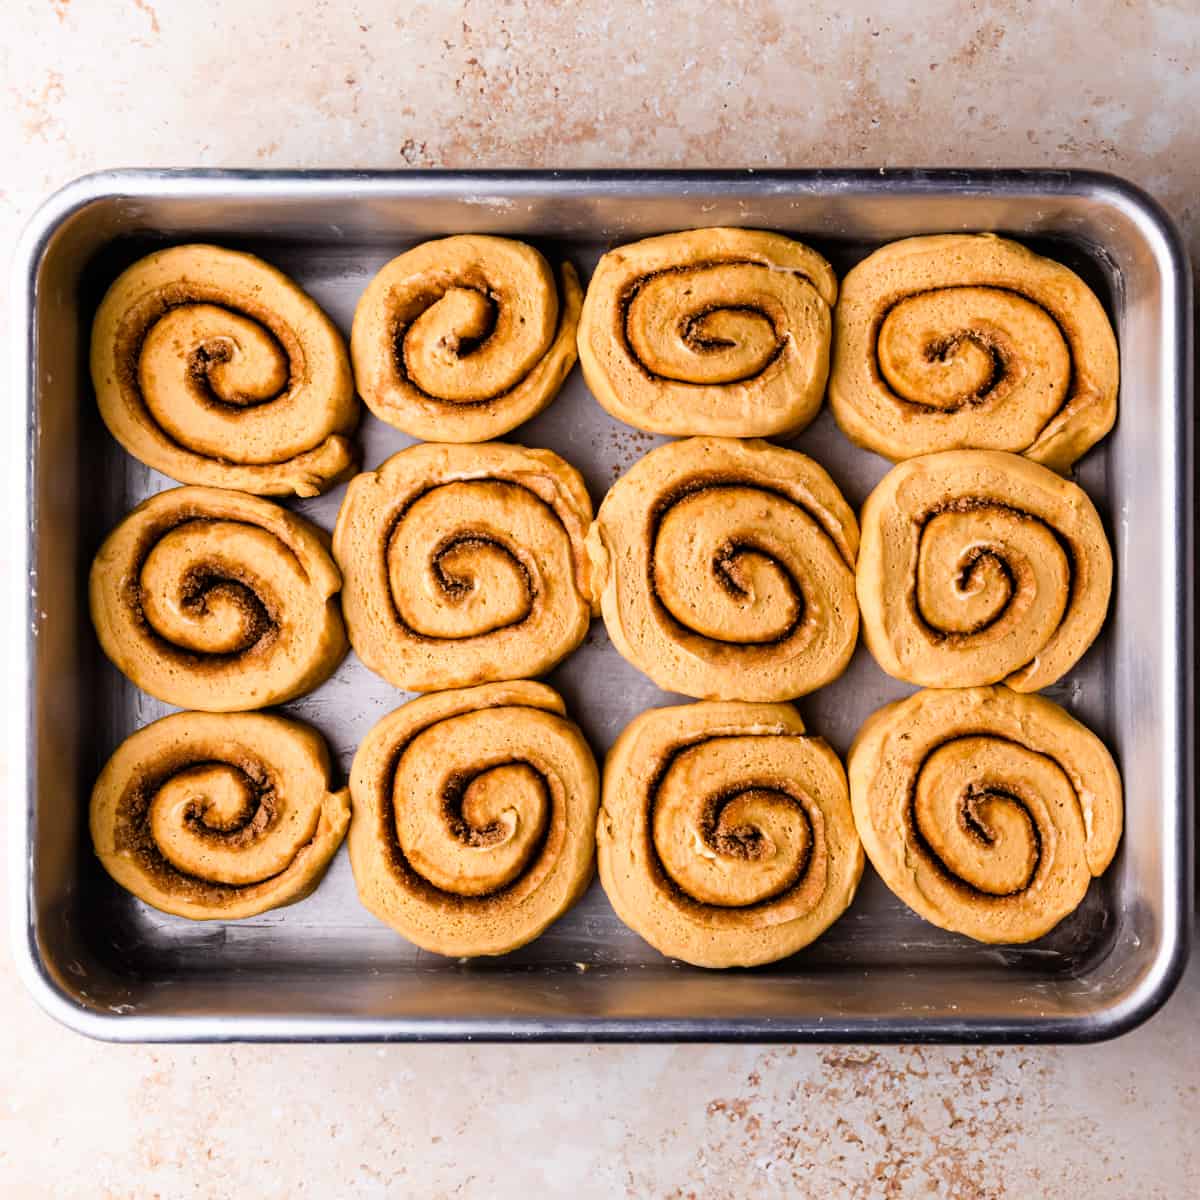 pumpkin cinnamon rolls arranged in a baking dish for second rise.